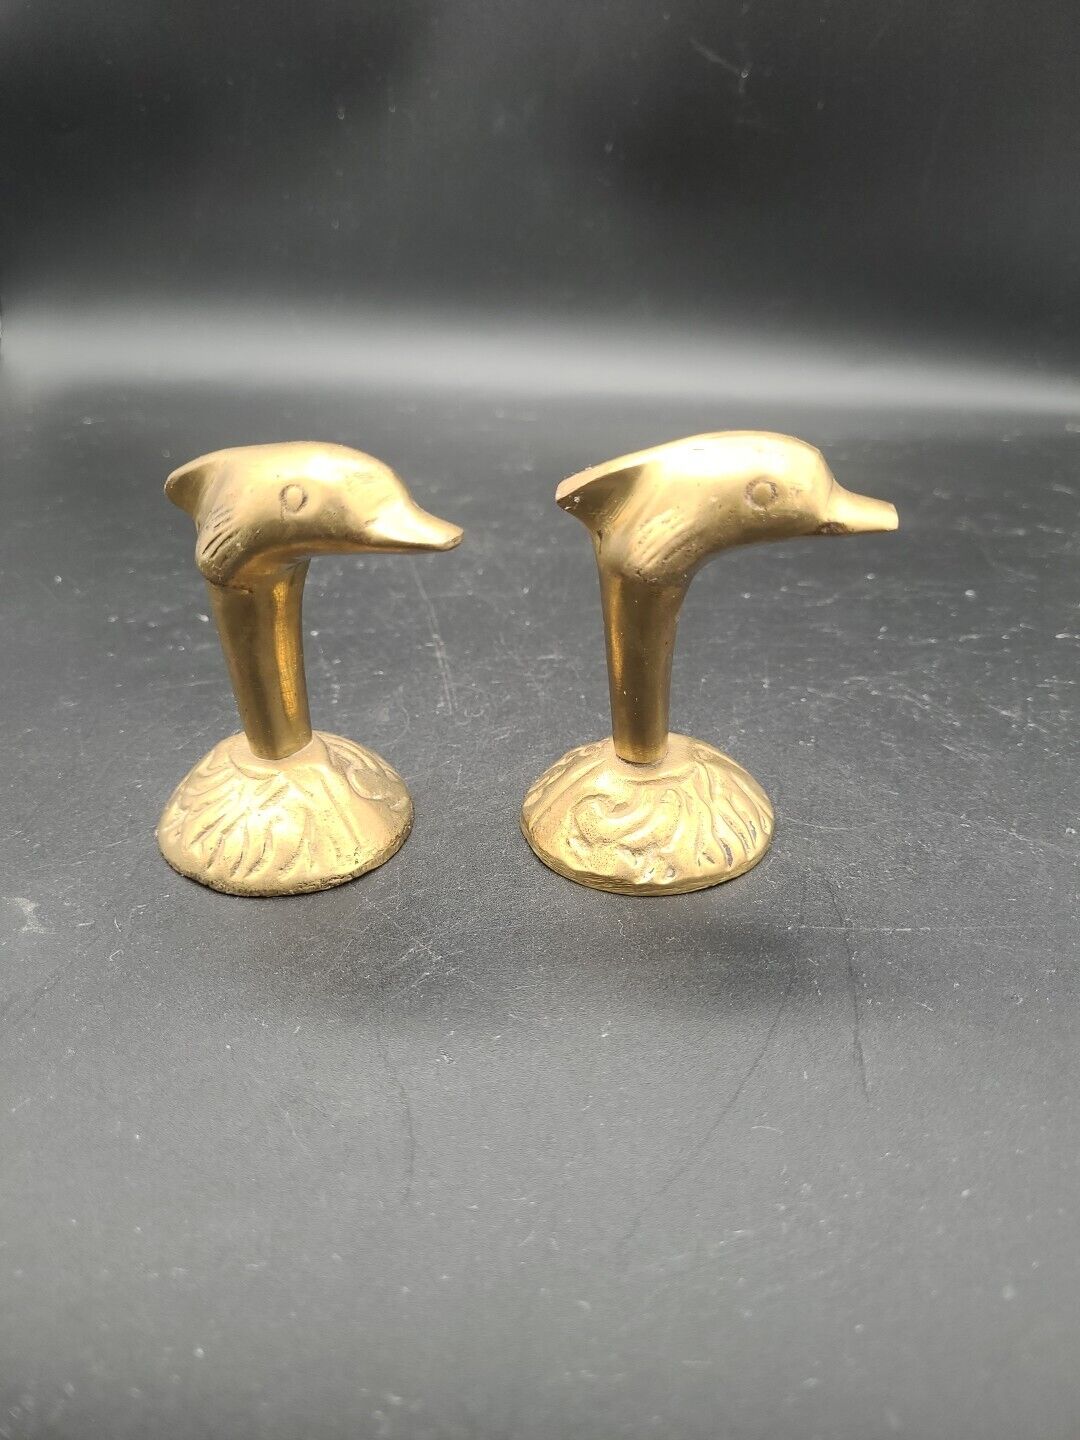 Vintage Solid Brass Leaping Dolphin Fish Figurine Hook Knob